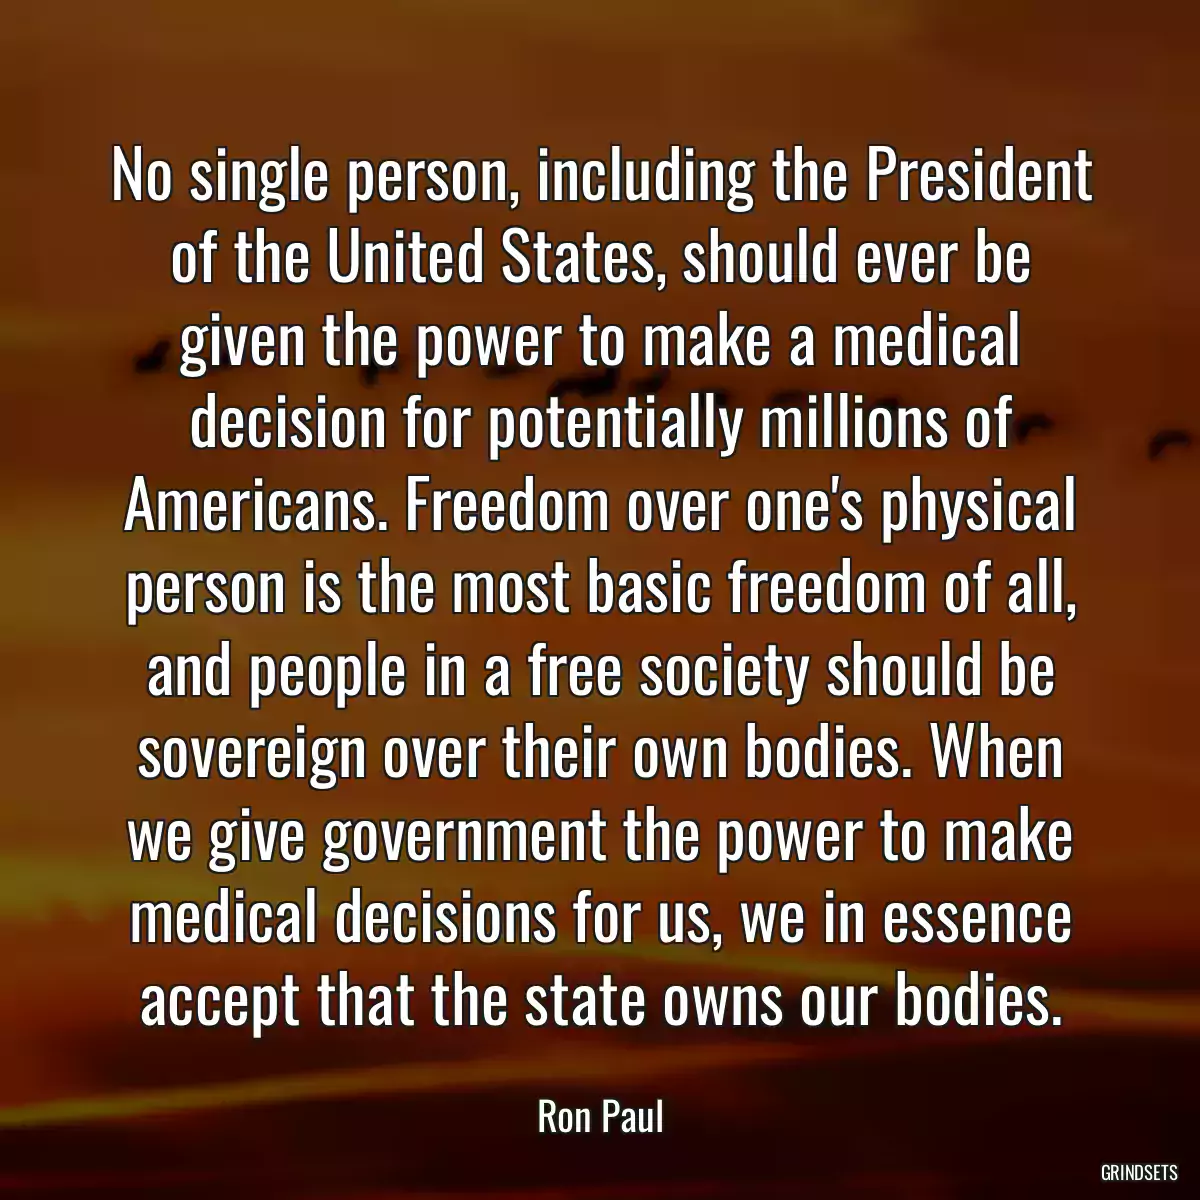 No single person, including the President of the United States, should ever be given the power to make a medical decision for potentially millions of Americans. Freedom over one\'s physical person is the most basic freedom of all, and people in a free society should be sovereign over their own bodies. When we give government the power to make medical decisions for us, we in essence accept that the state owns our bodies.